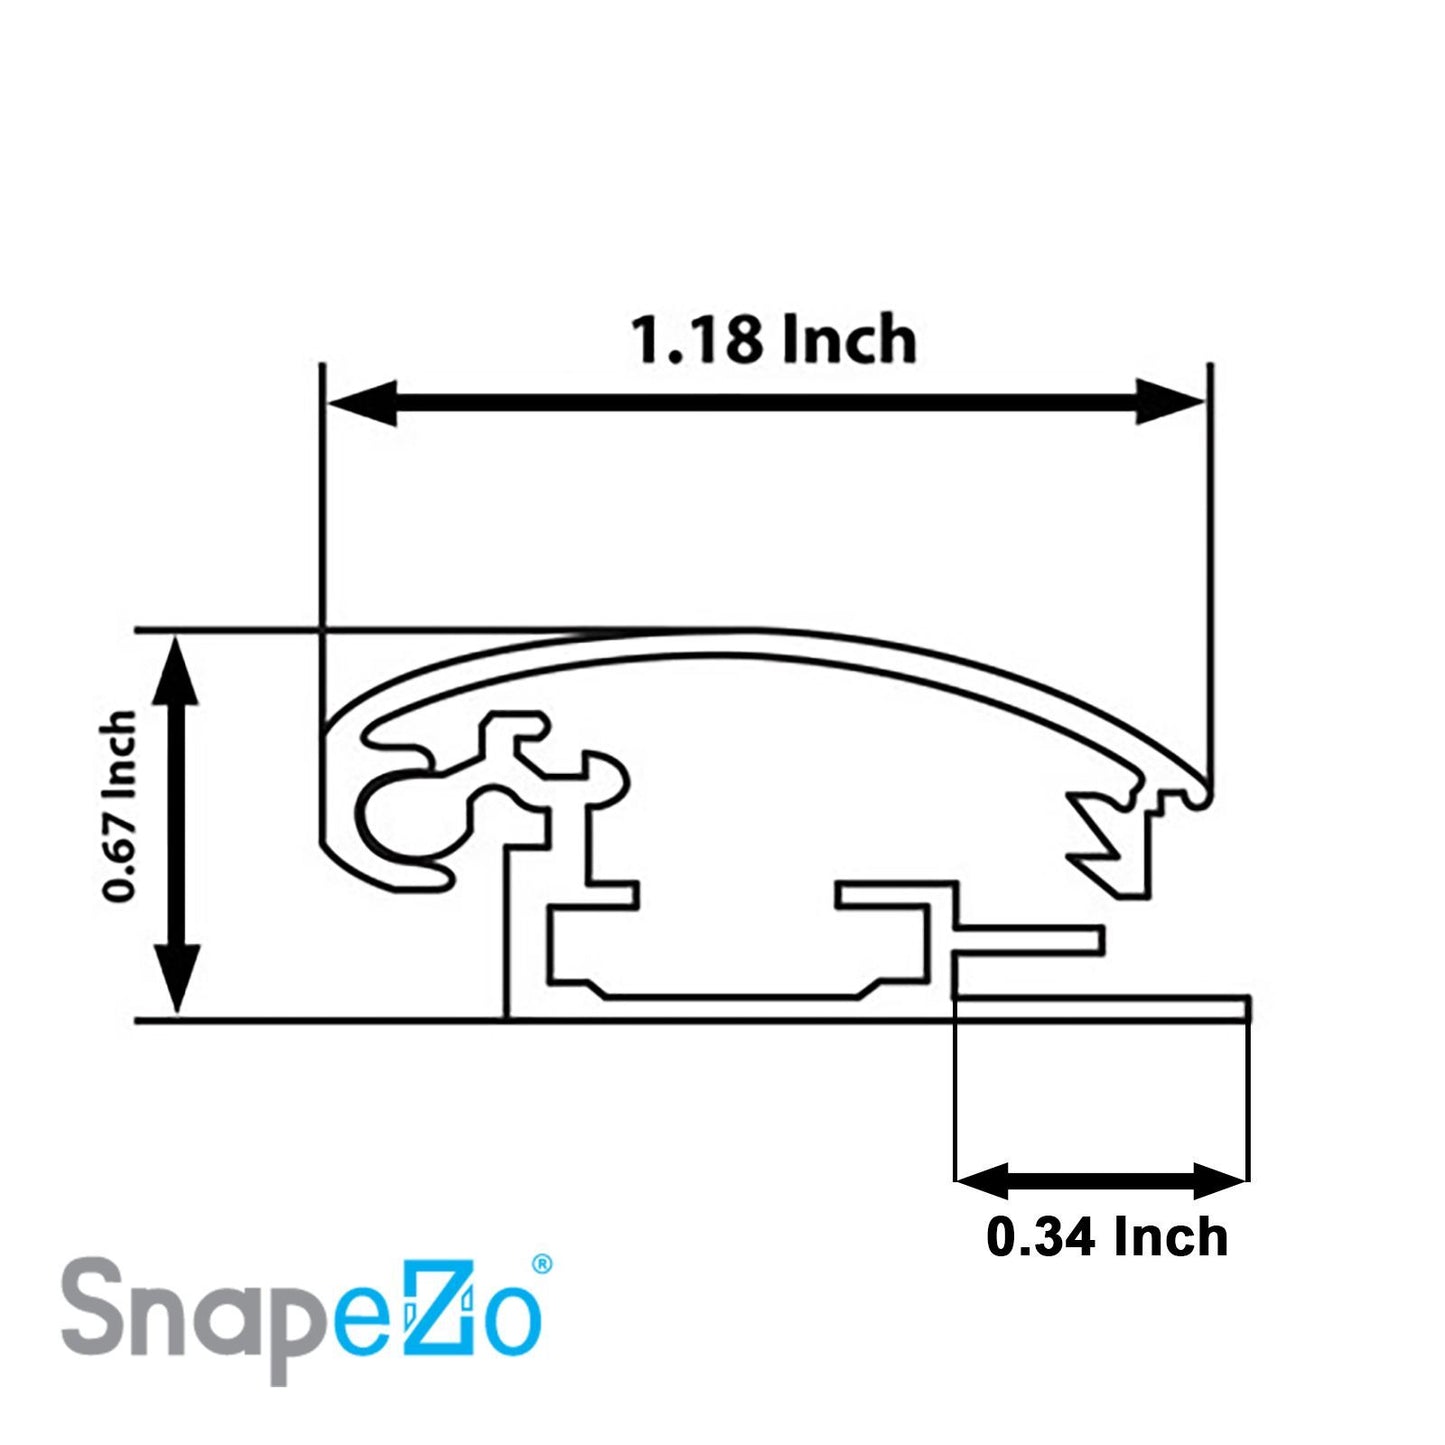 10x24 Blue SnapeZo® Snap Frame - 1.2 Inch Profile